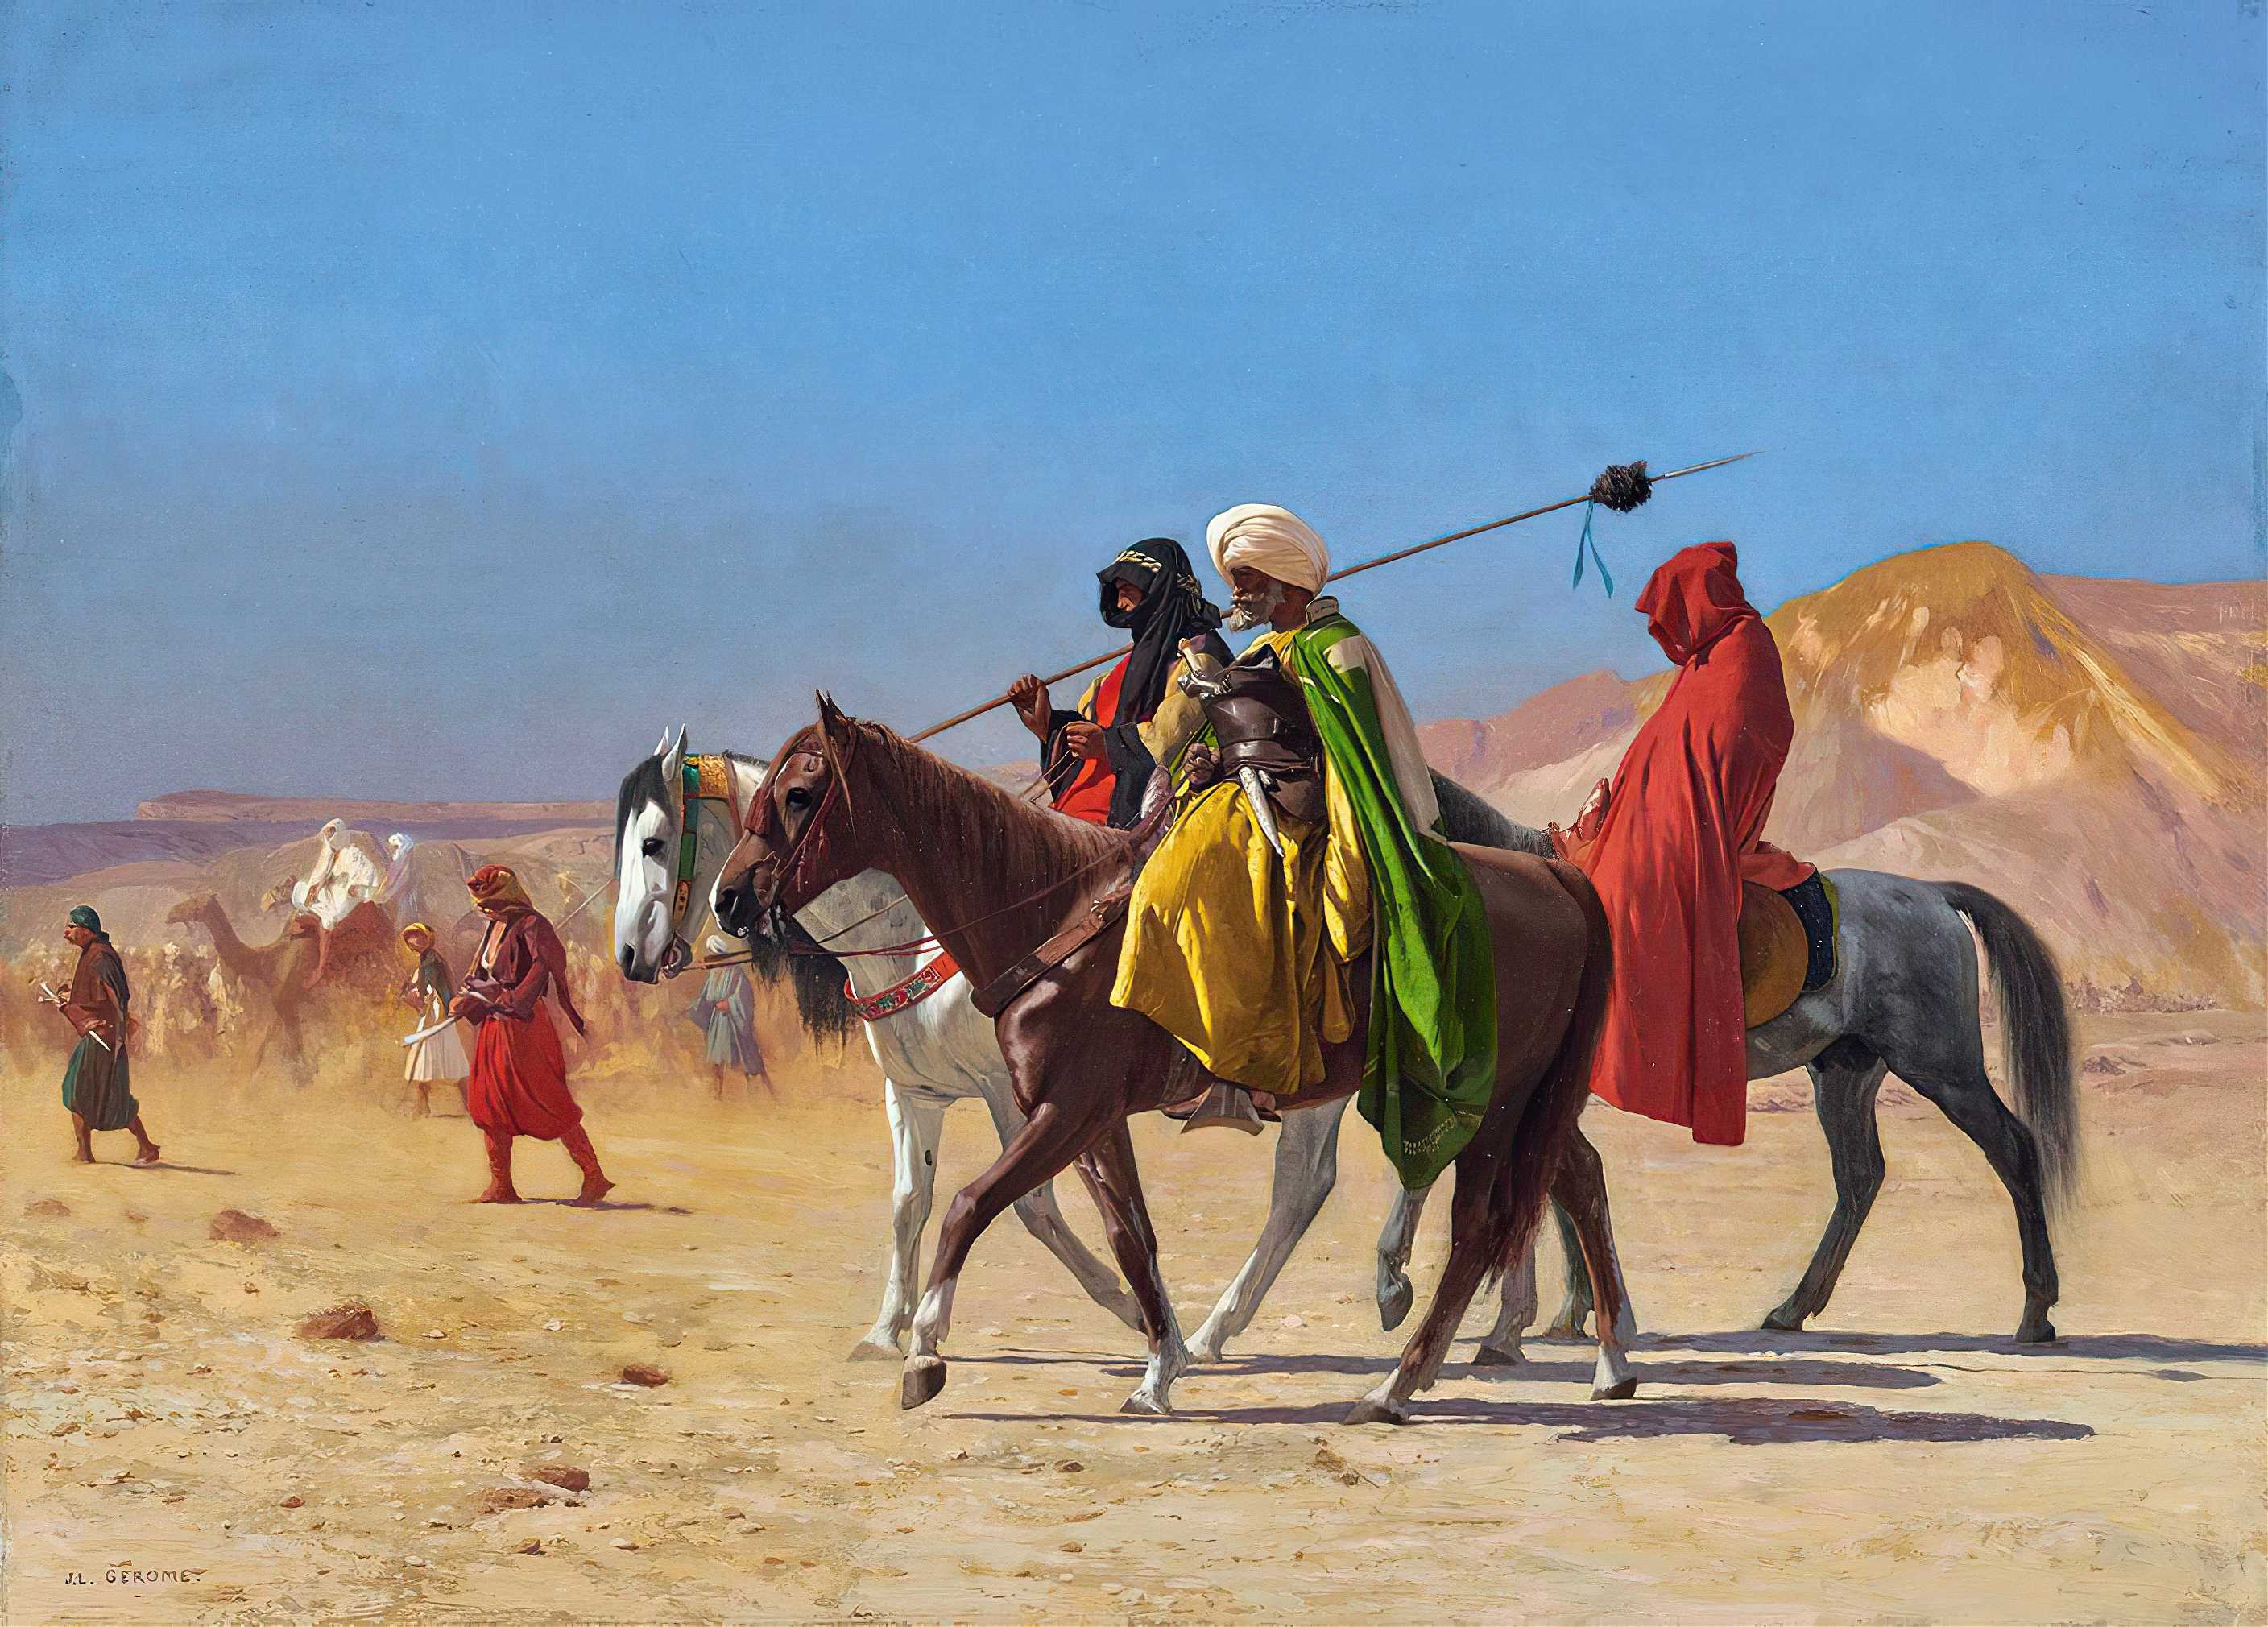 Find out more about Jean-Léon Gérôme - Riders Crossing the Desert